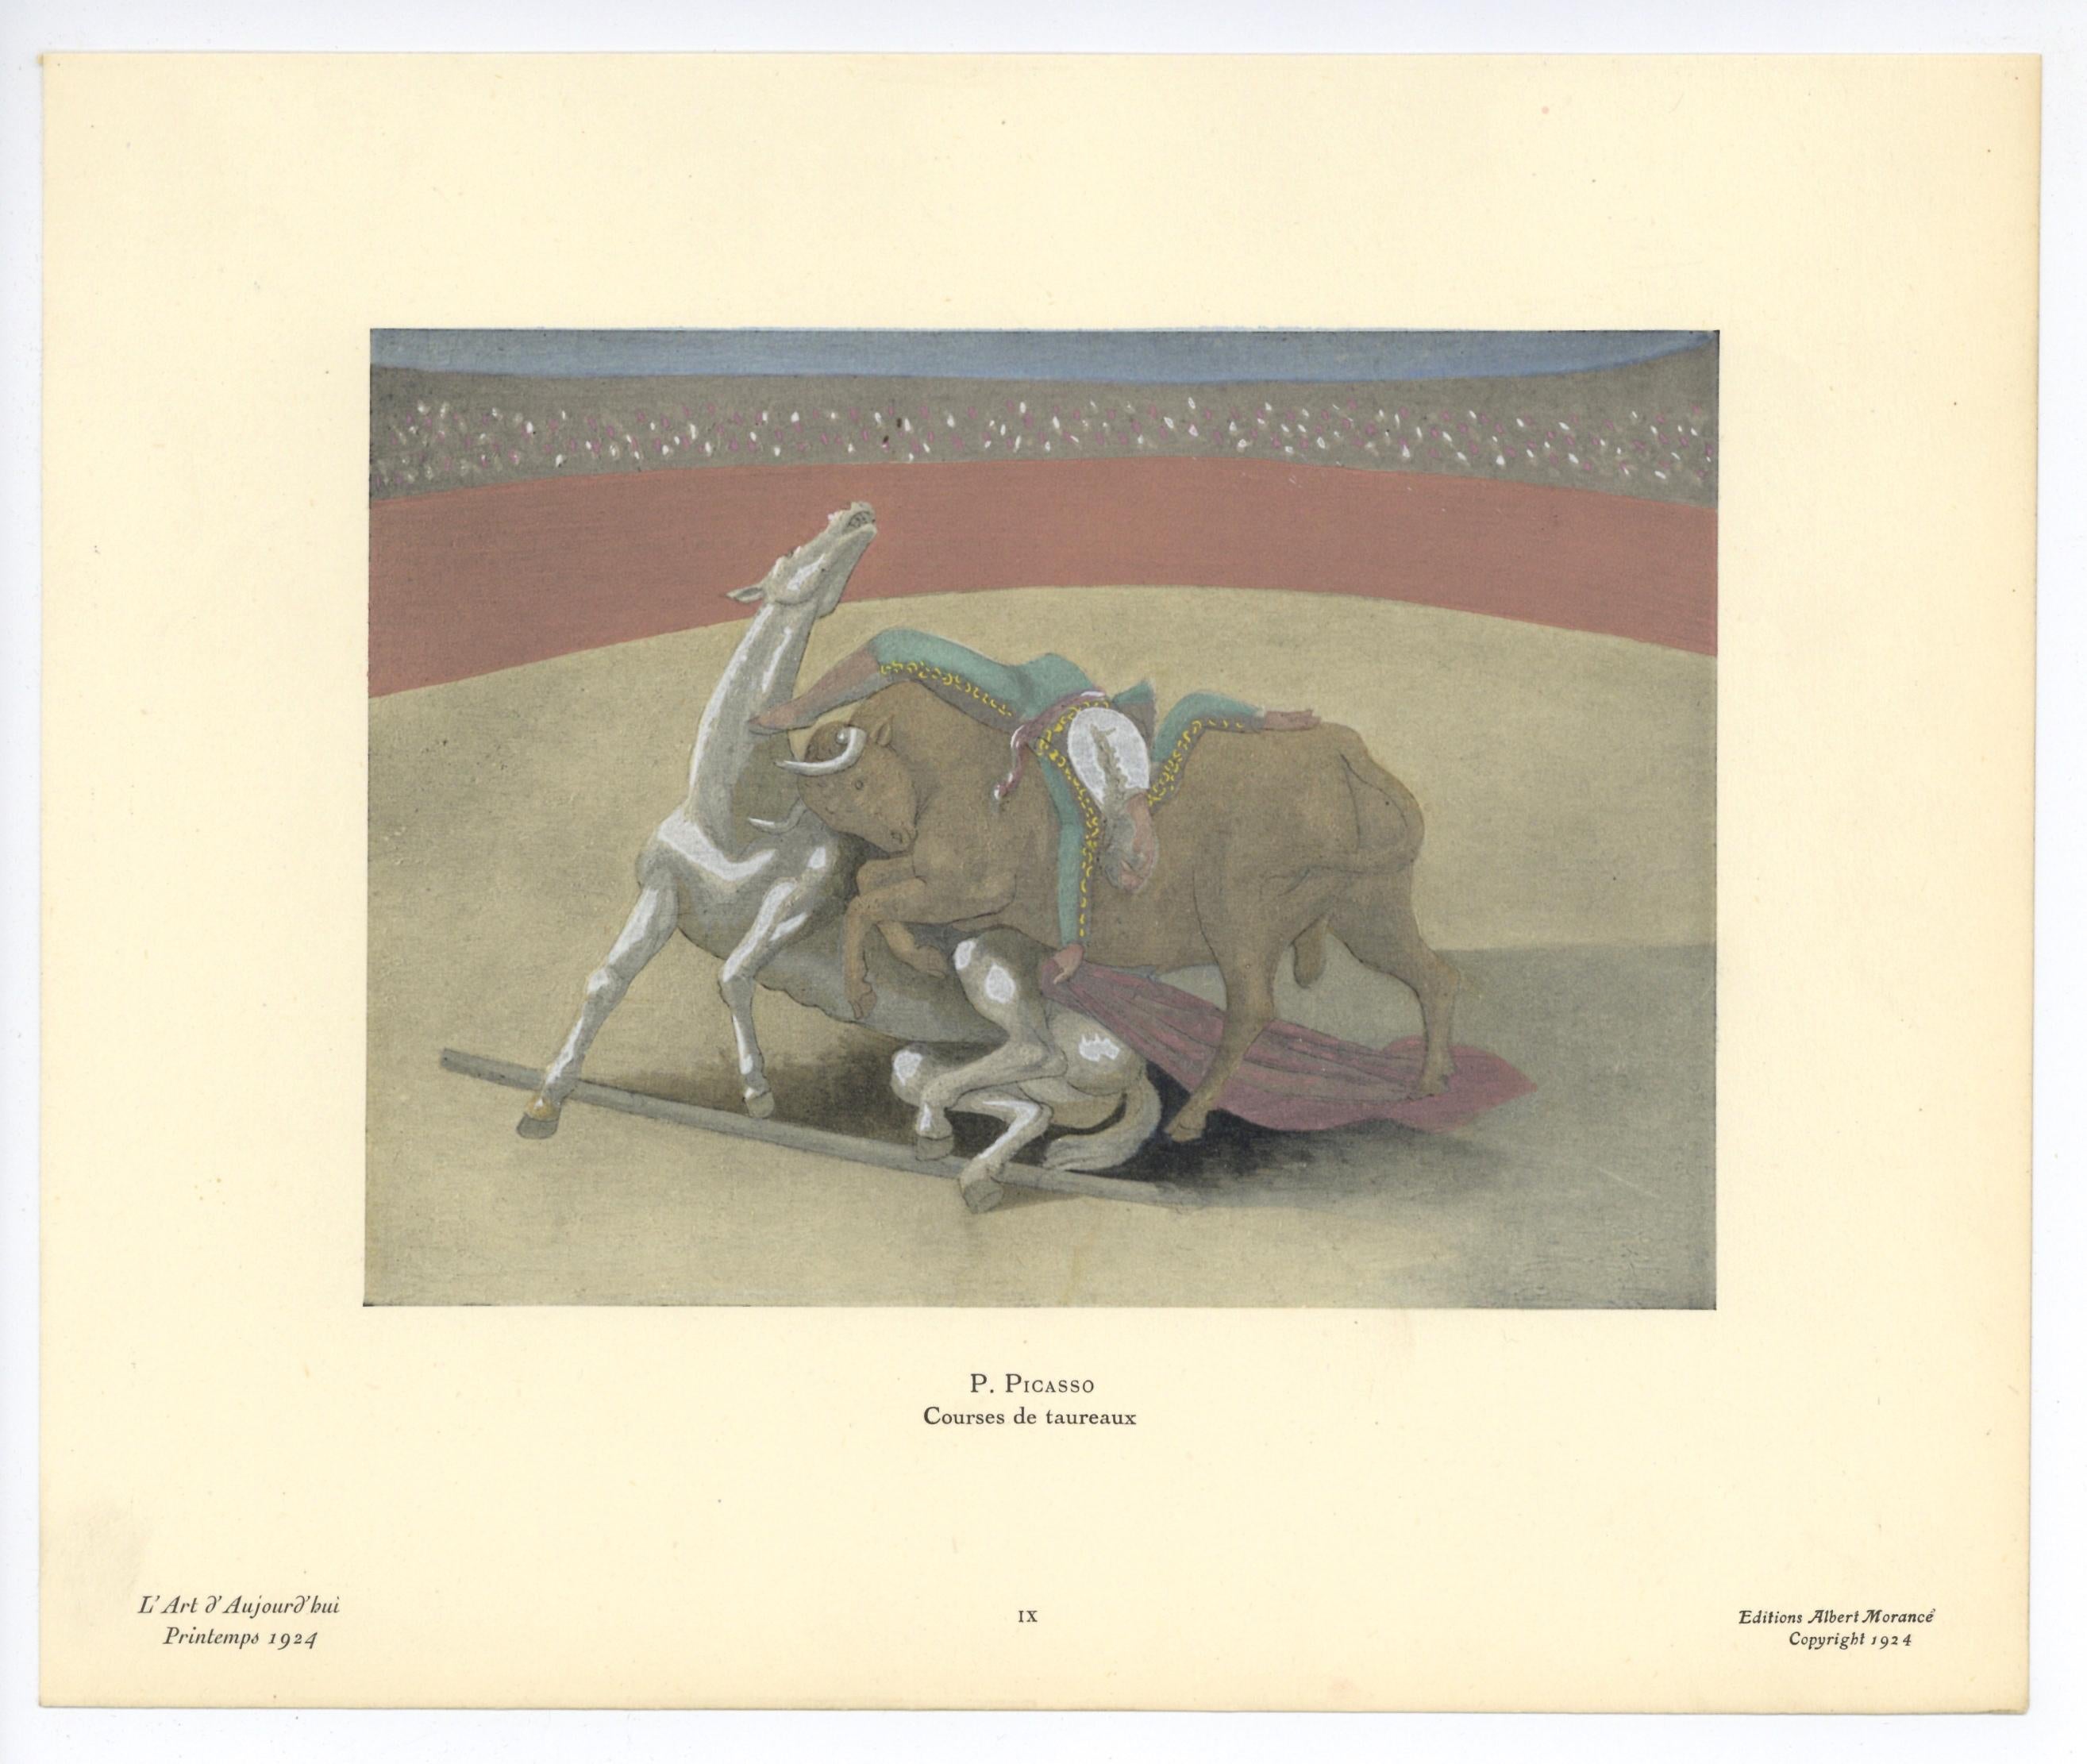 Medium: pochoir (after the watercolor). Printed in Paris in 1924 and published by Albert Morancé for 